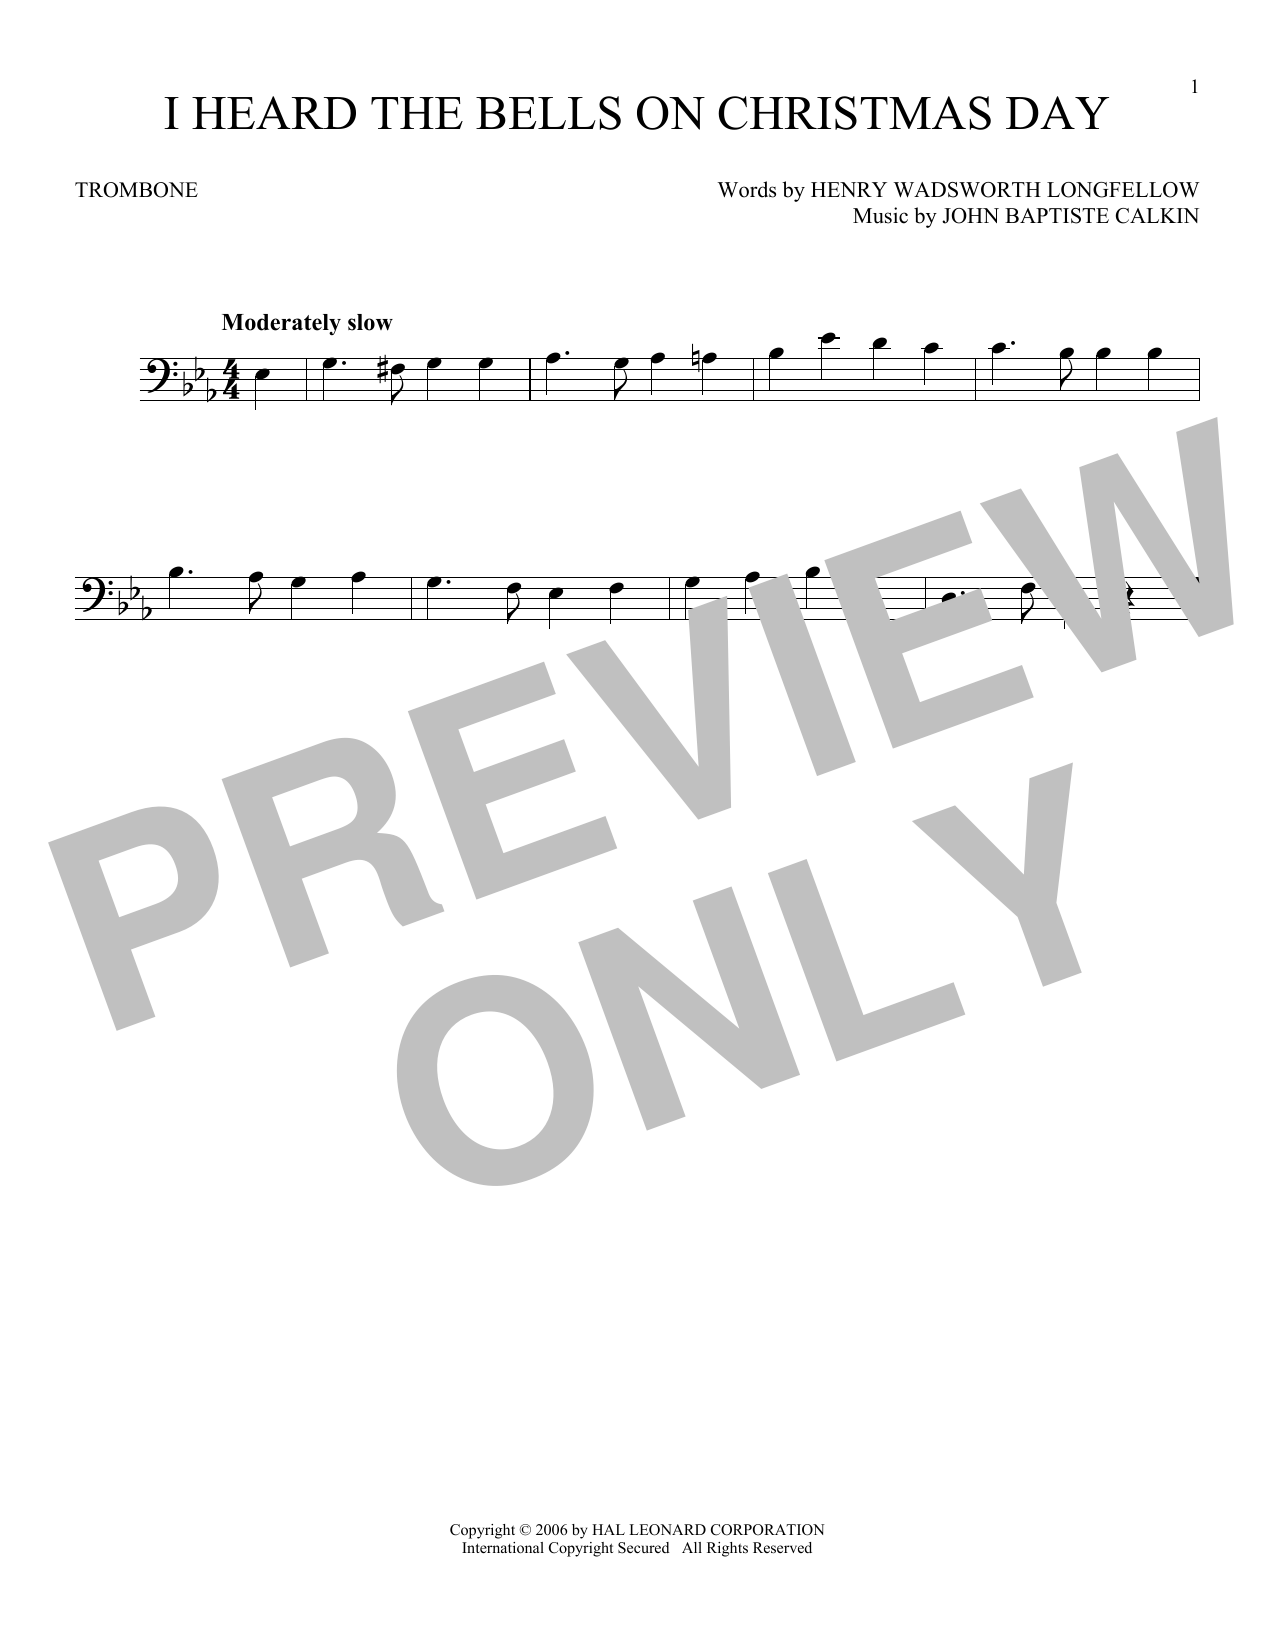 Download Johnny Marks I Heard The Bells On Christmas Day Sheet Music